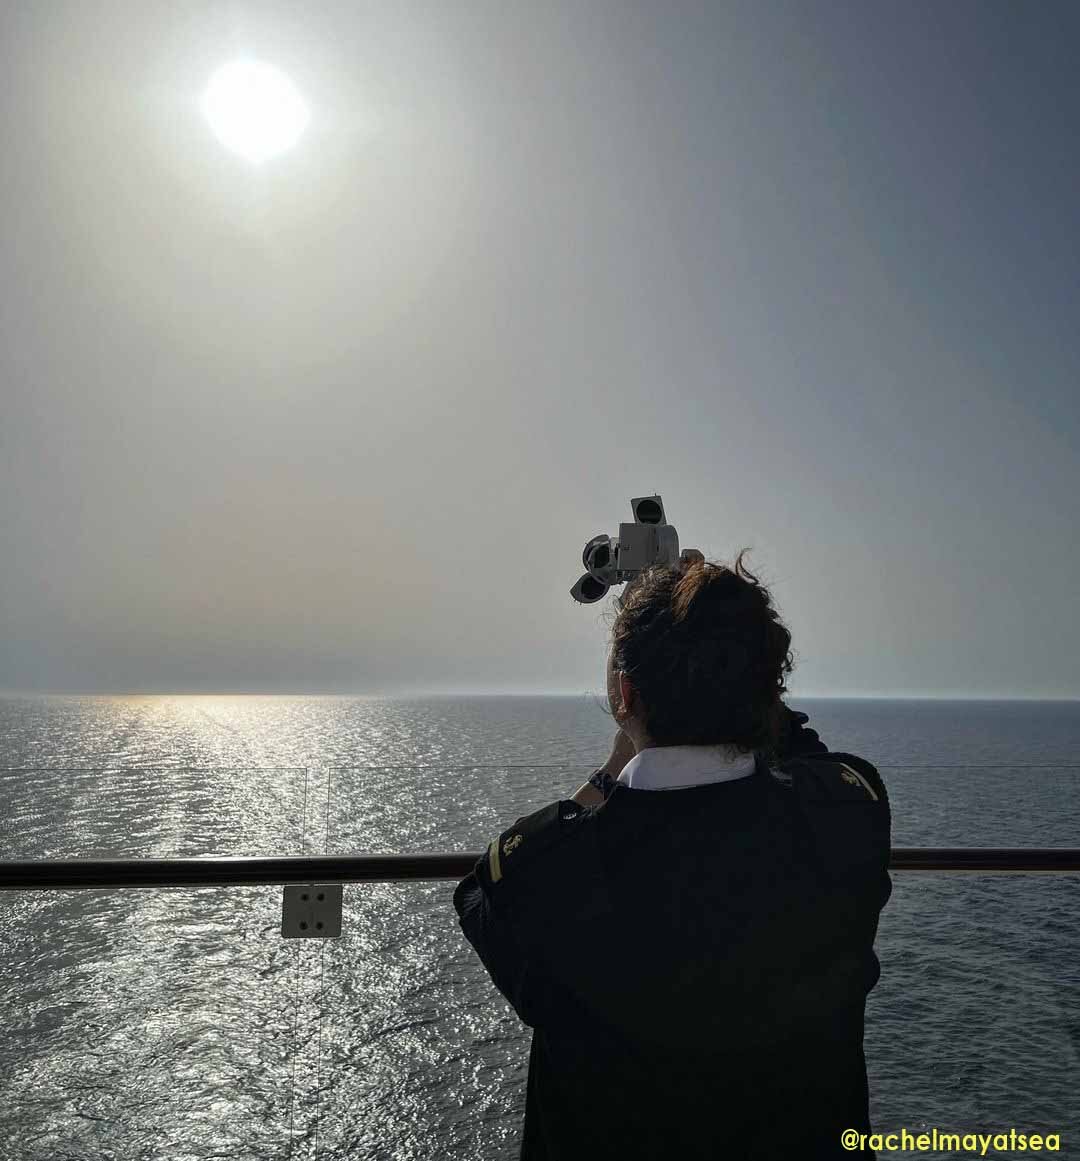 A seawoman taking the altitude of the sun using a sextant to find her position in the middle of the ocean.